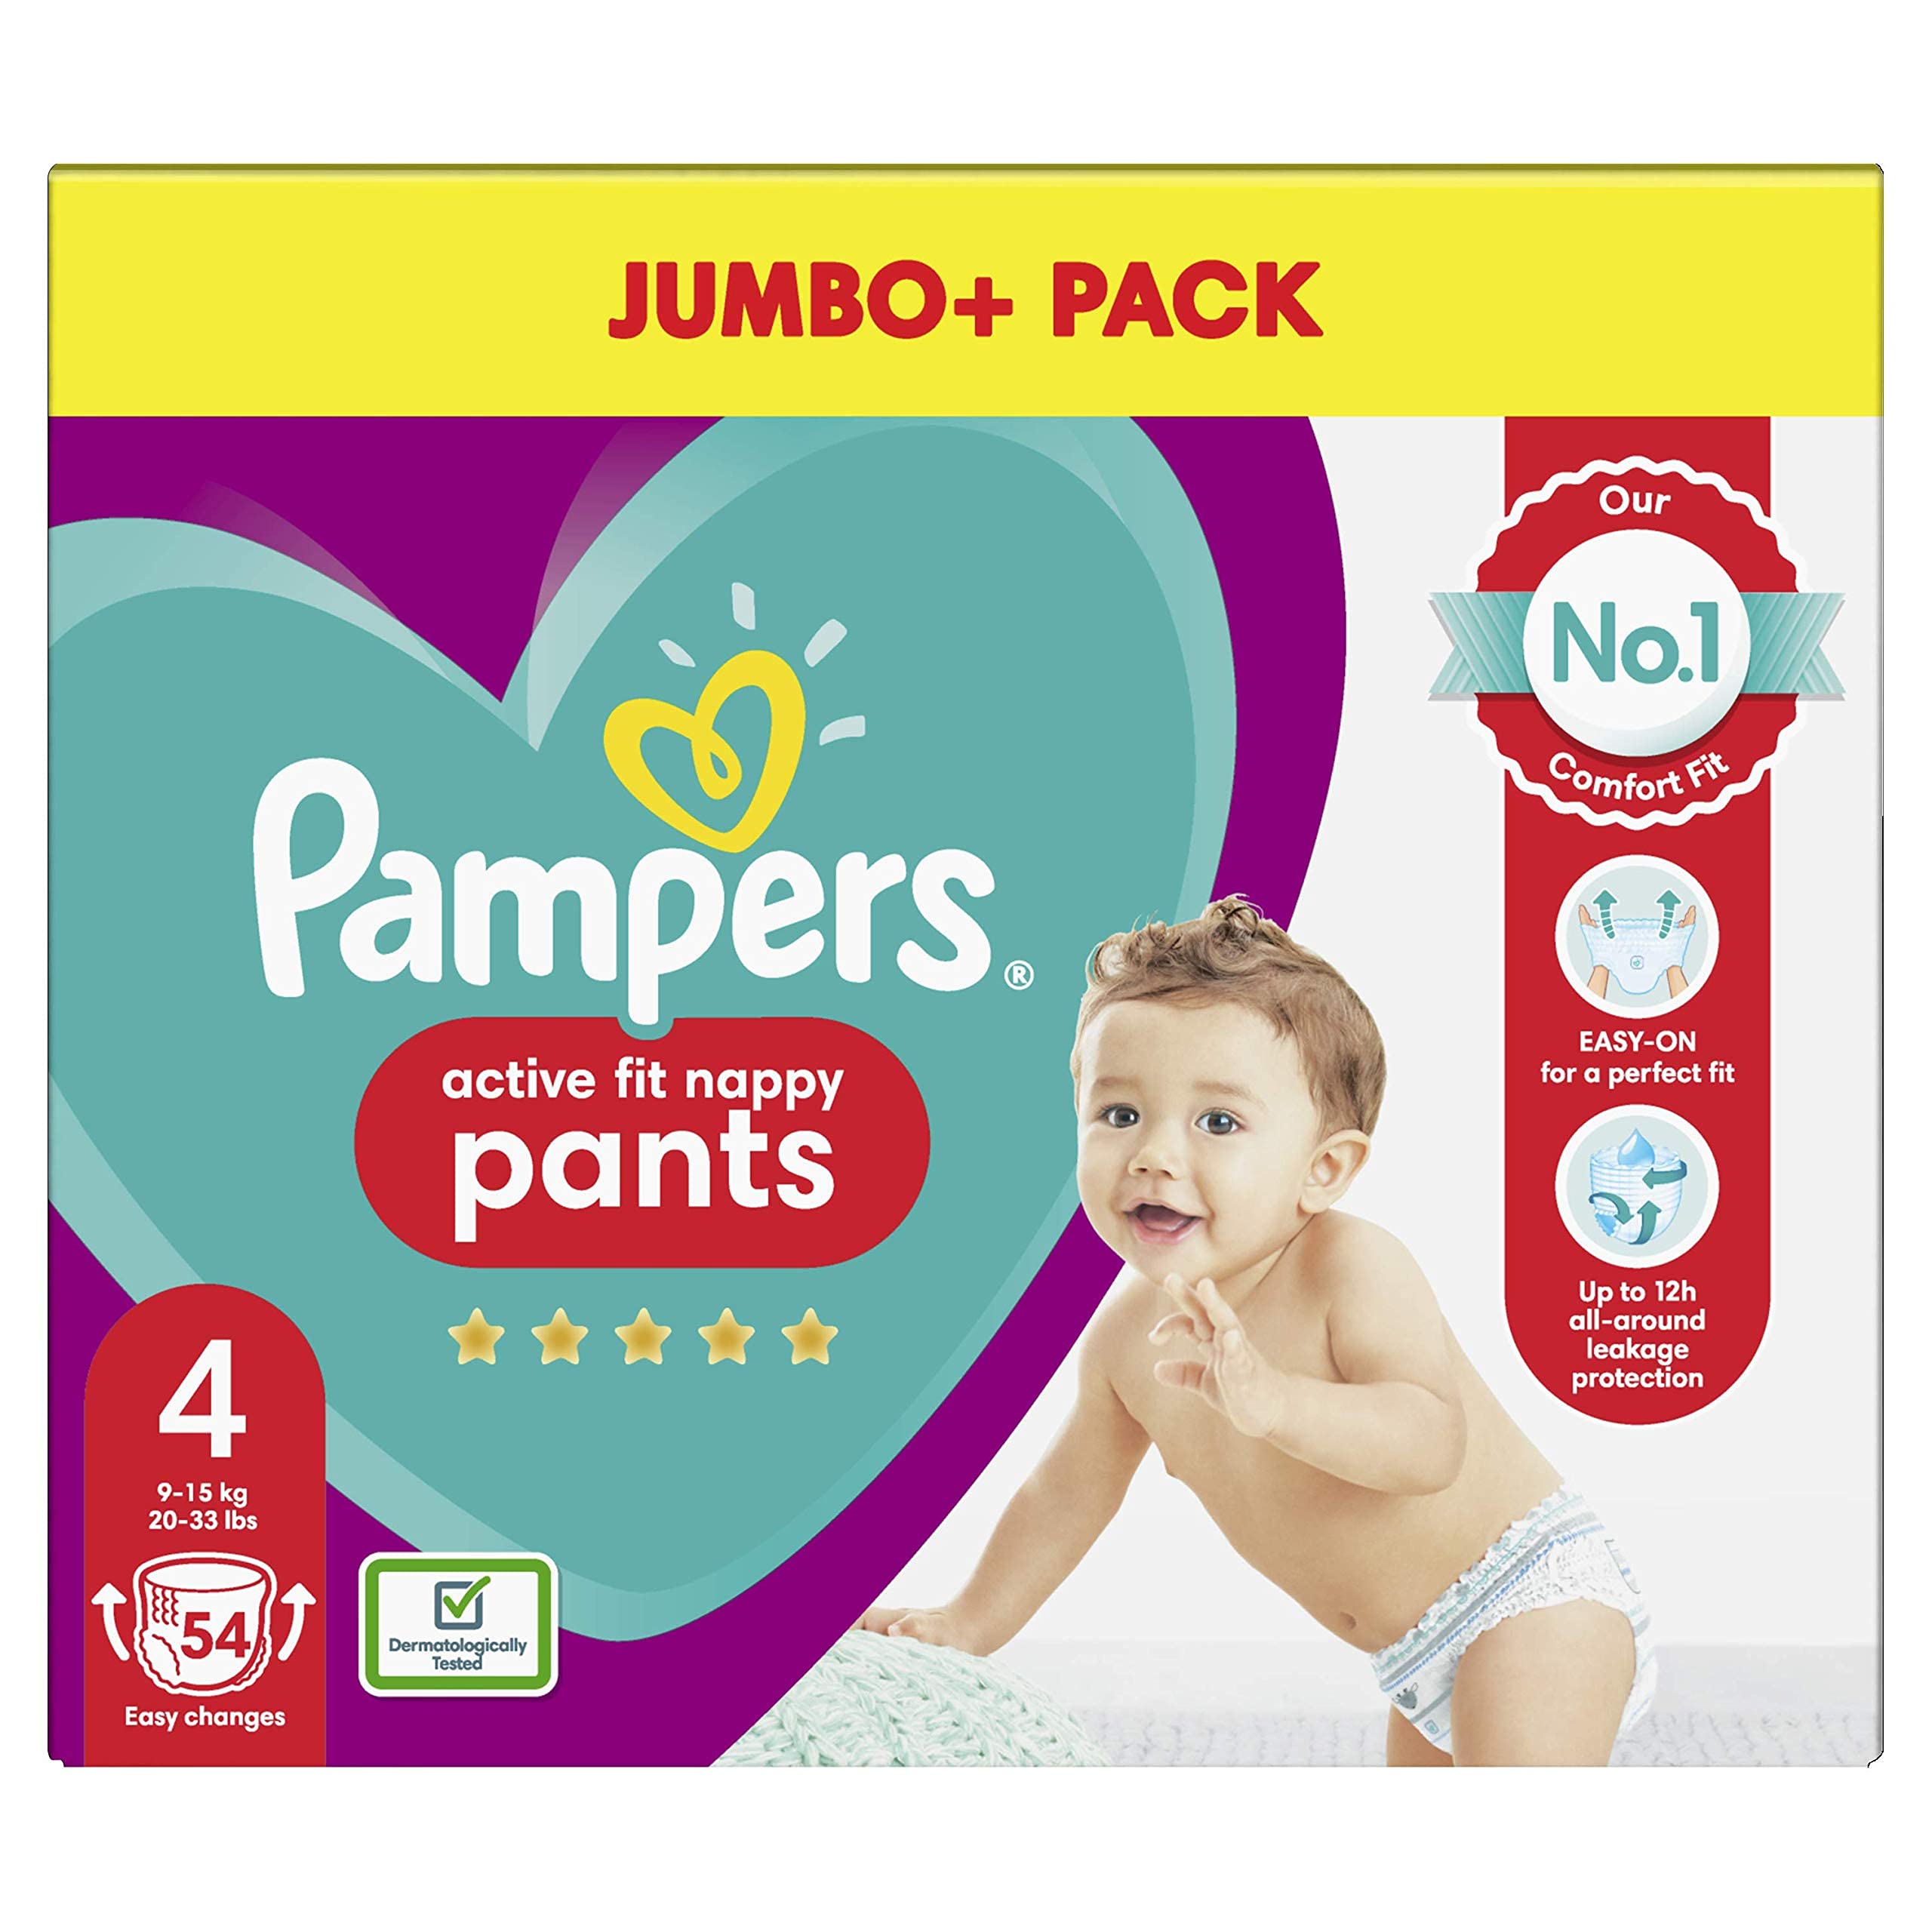 zl pampers